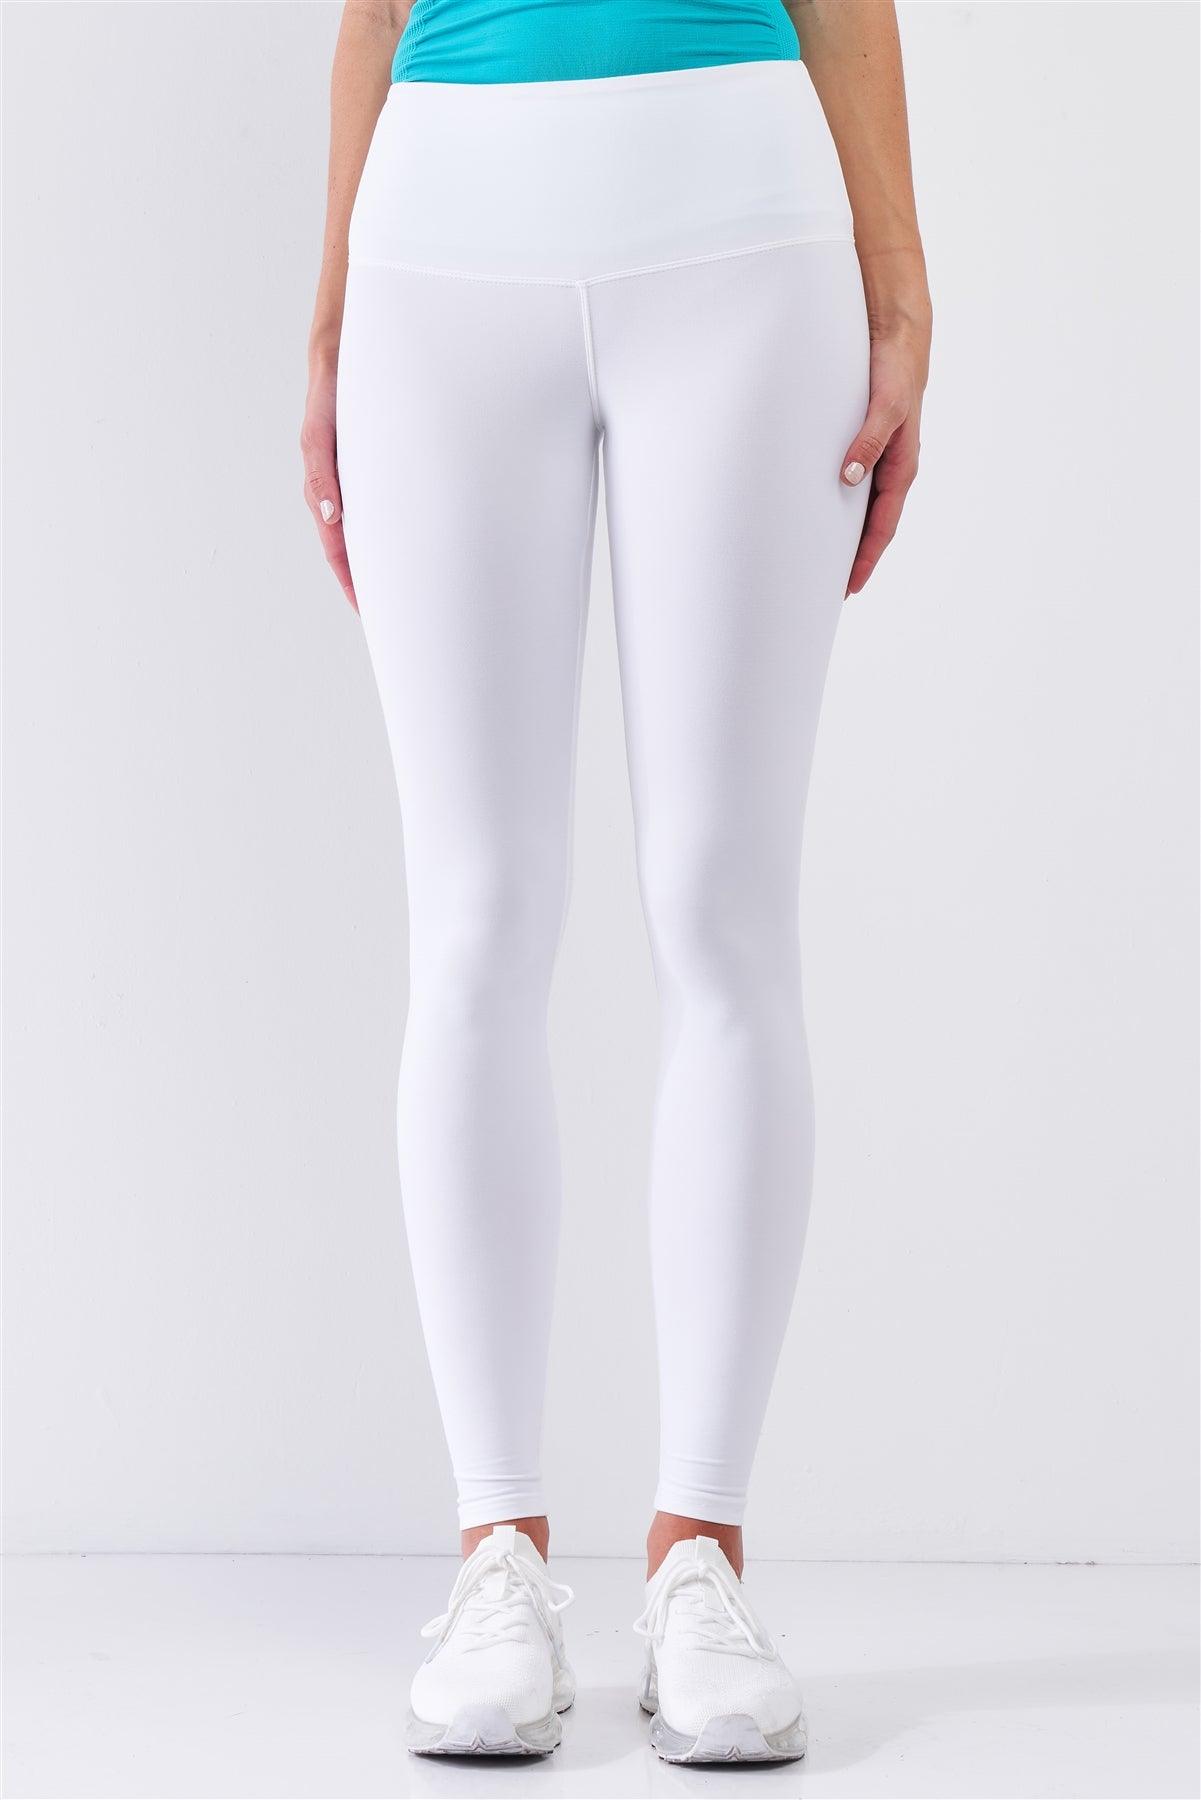 White High-Rise Tight Fit Soft Yoga & Work Out Legging Pants /1-2-2-1